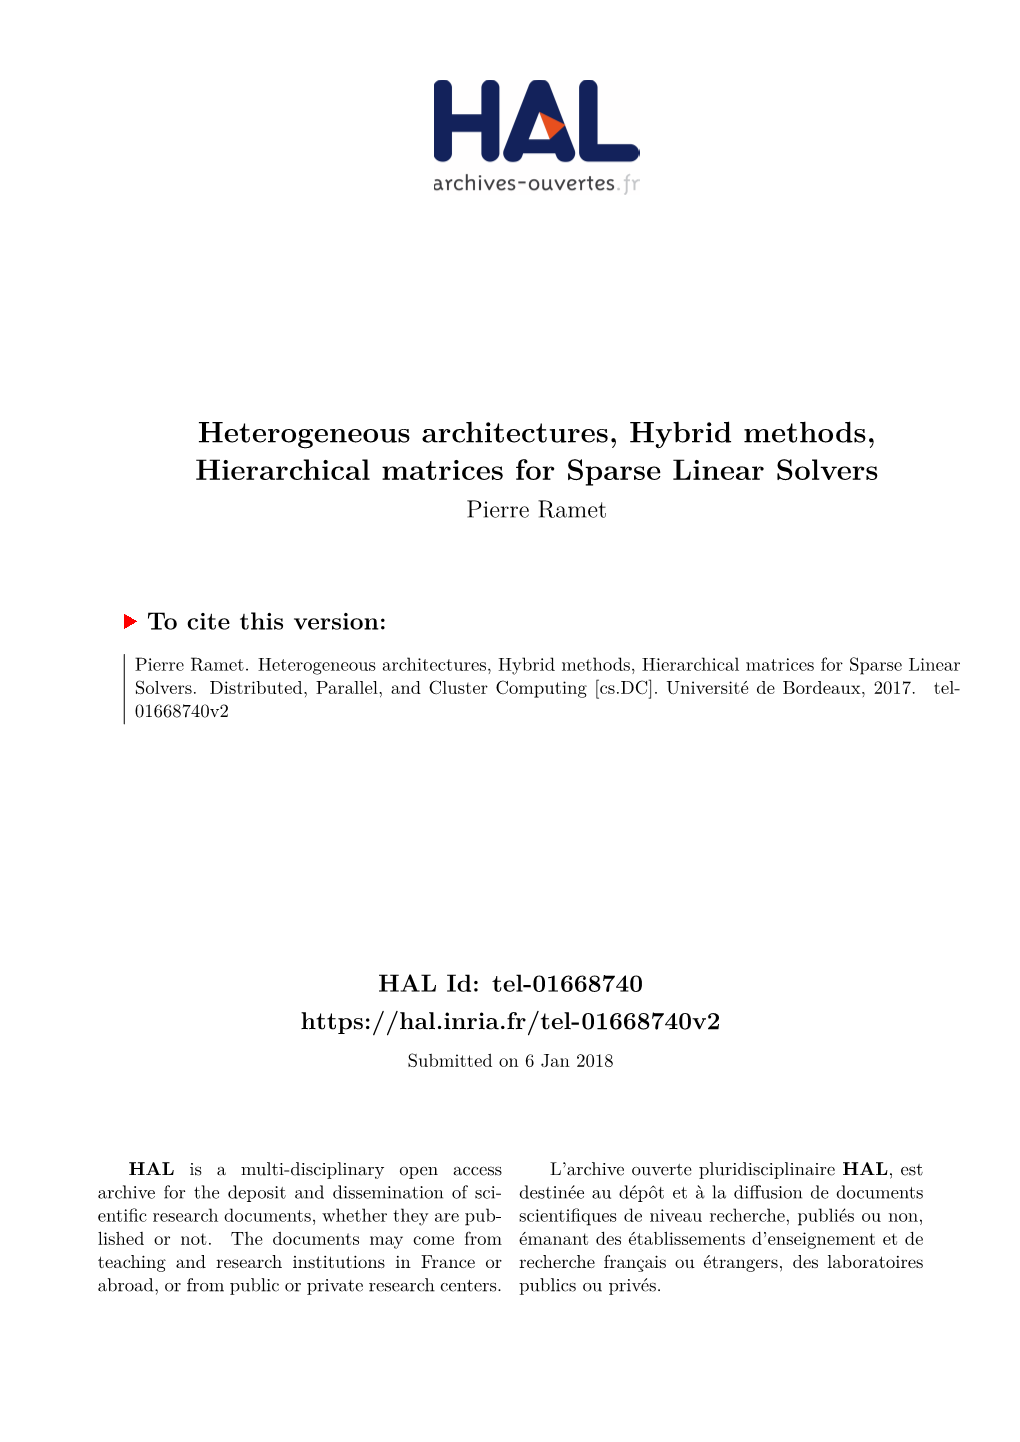 Heterogeneous Architectures, Hybrid Methods, Hierarchical Matrices for Sparse Linear Solvers Pierre Ramet